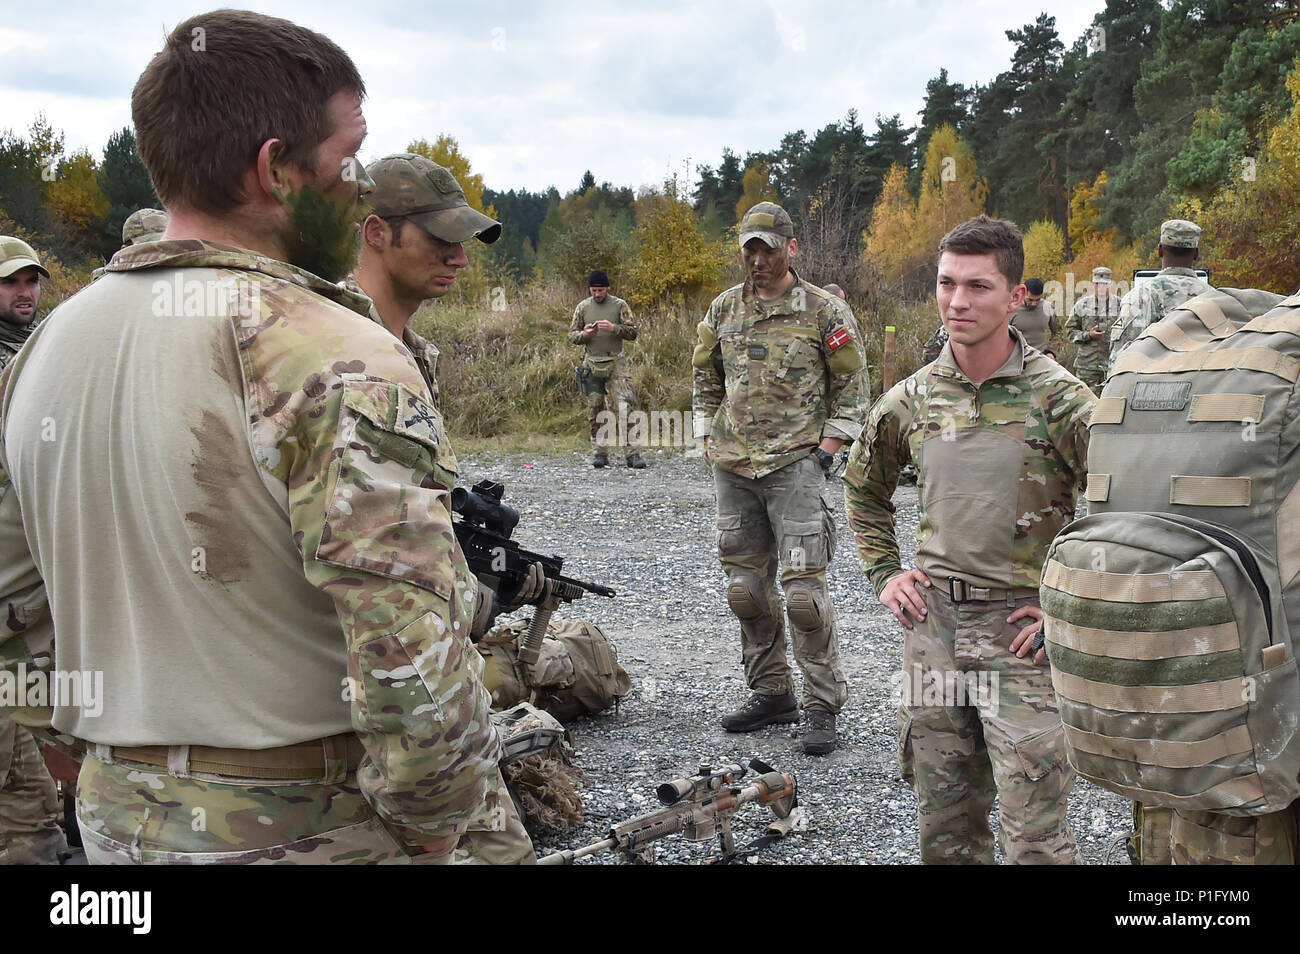 Soldiers from the United Kingdom, Denmark and the United States have a conversation before they start the Rough Terrain Run task during the European Best Sniper Squad Competition at the 7th Army Training Command’s, Grafenwoehr Training Area, Bavaria, Germany, Oct. 26, 2016. The European Best Sniper Squad Competition is an Army Europe competition challenging militaries from across Europe to compete and enhance teamwork with Allies and partner nations. (U.S. Army photo by Visual Information Specialist Gertrud Zach) Stock Photo